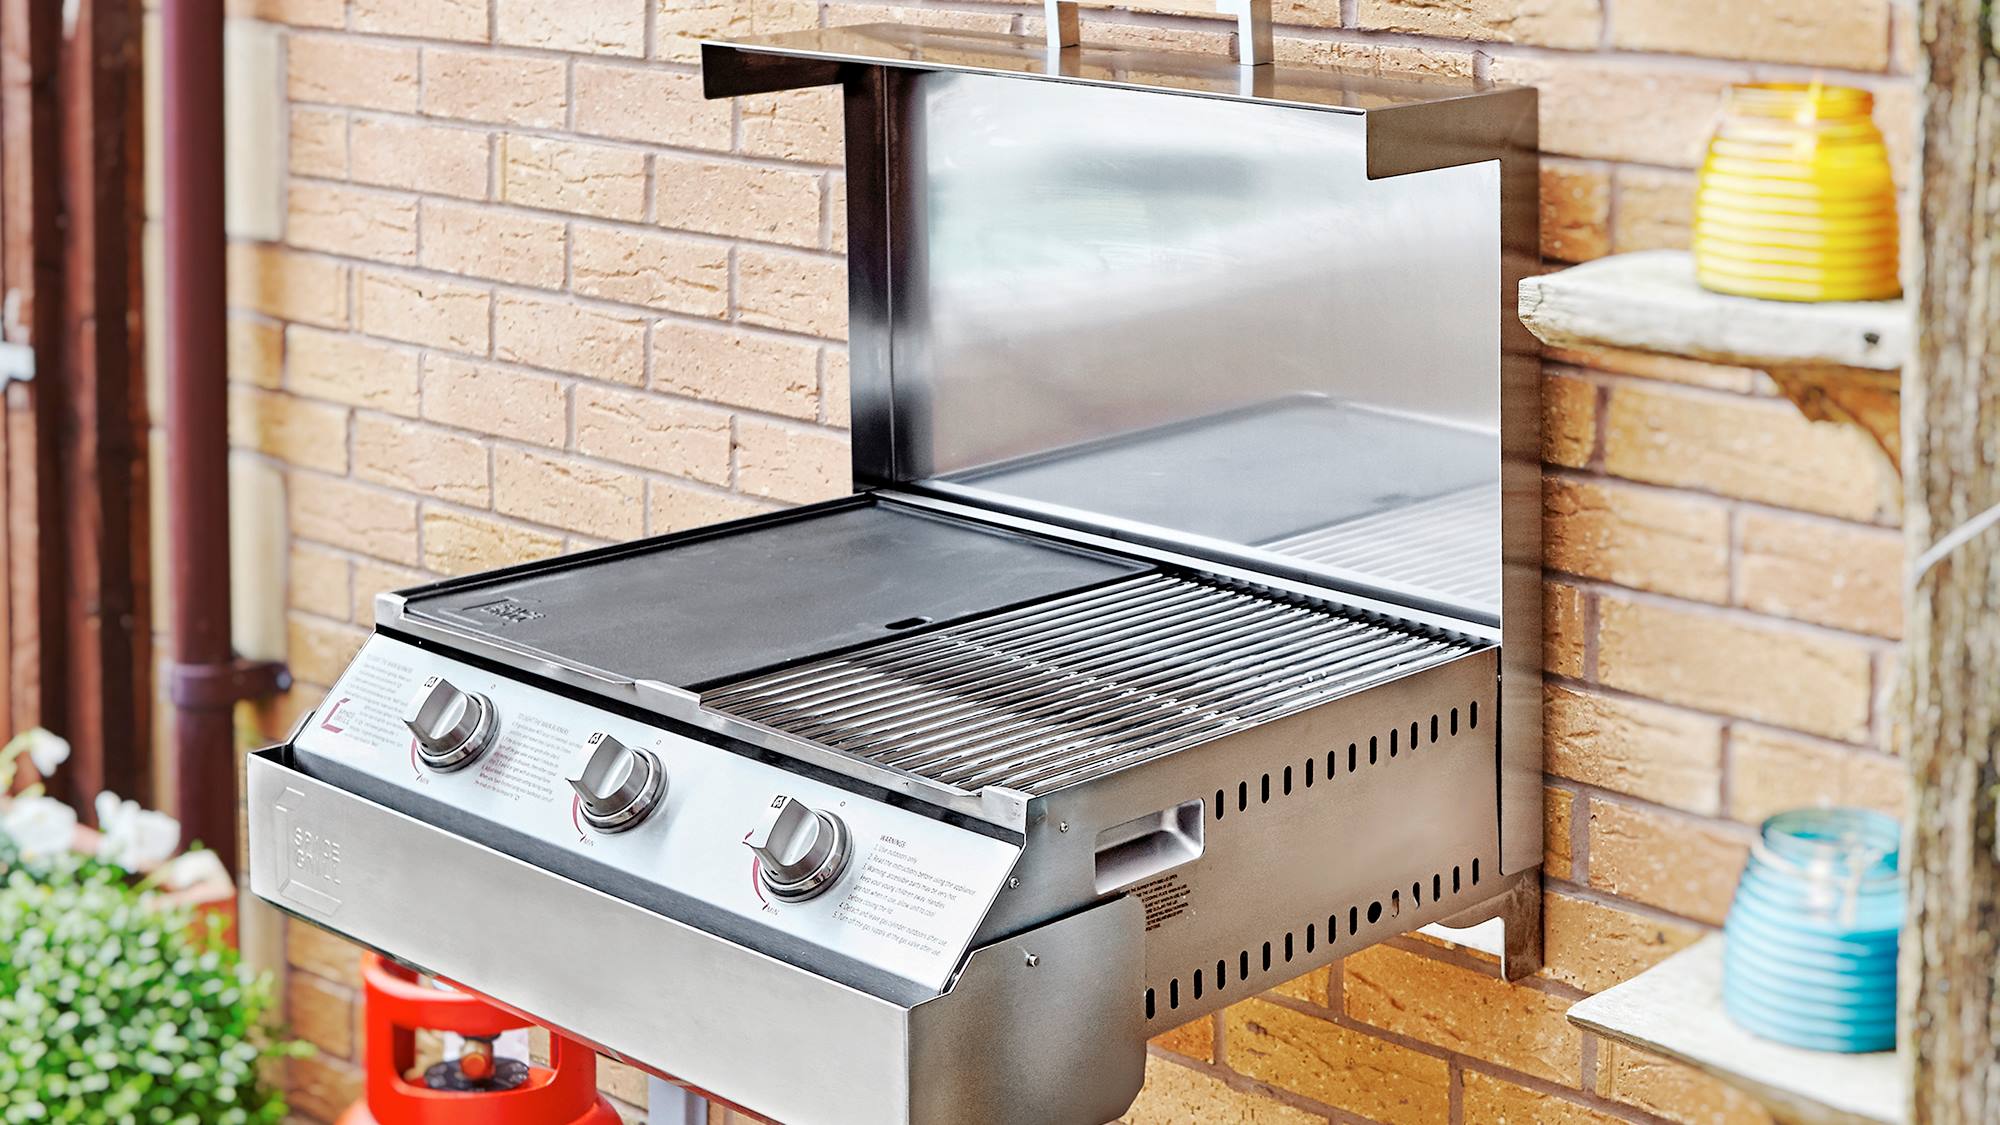 Space-saving BBQ that folds and attaches to wall